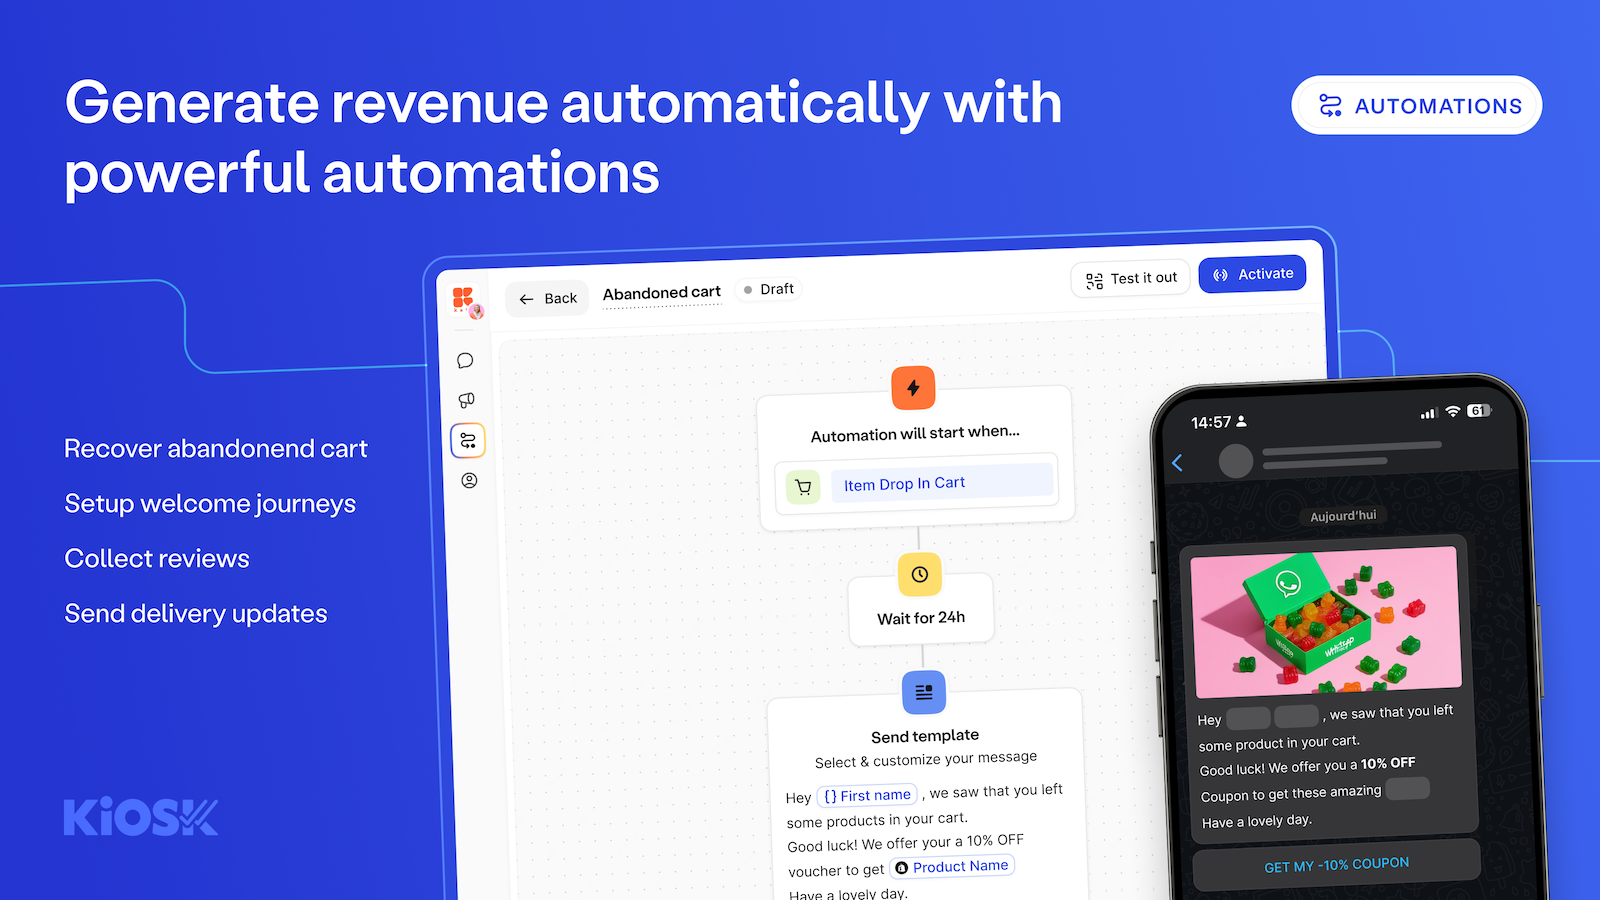 Generate revenue automatically with powerful automations